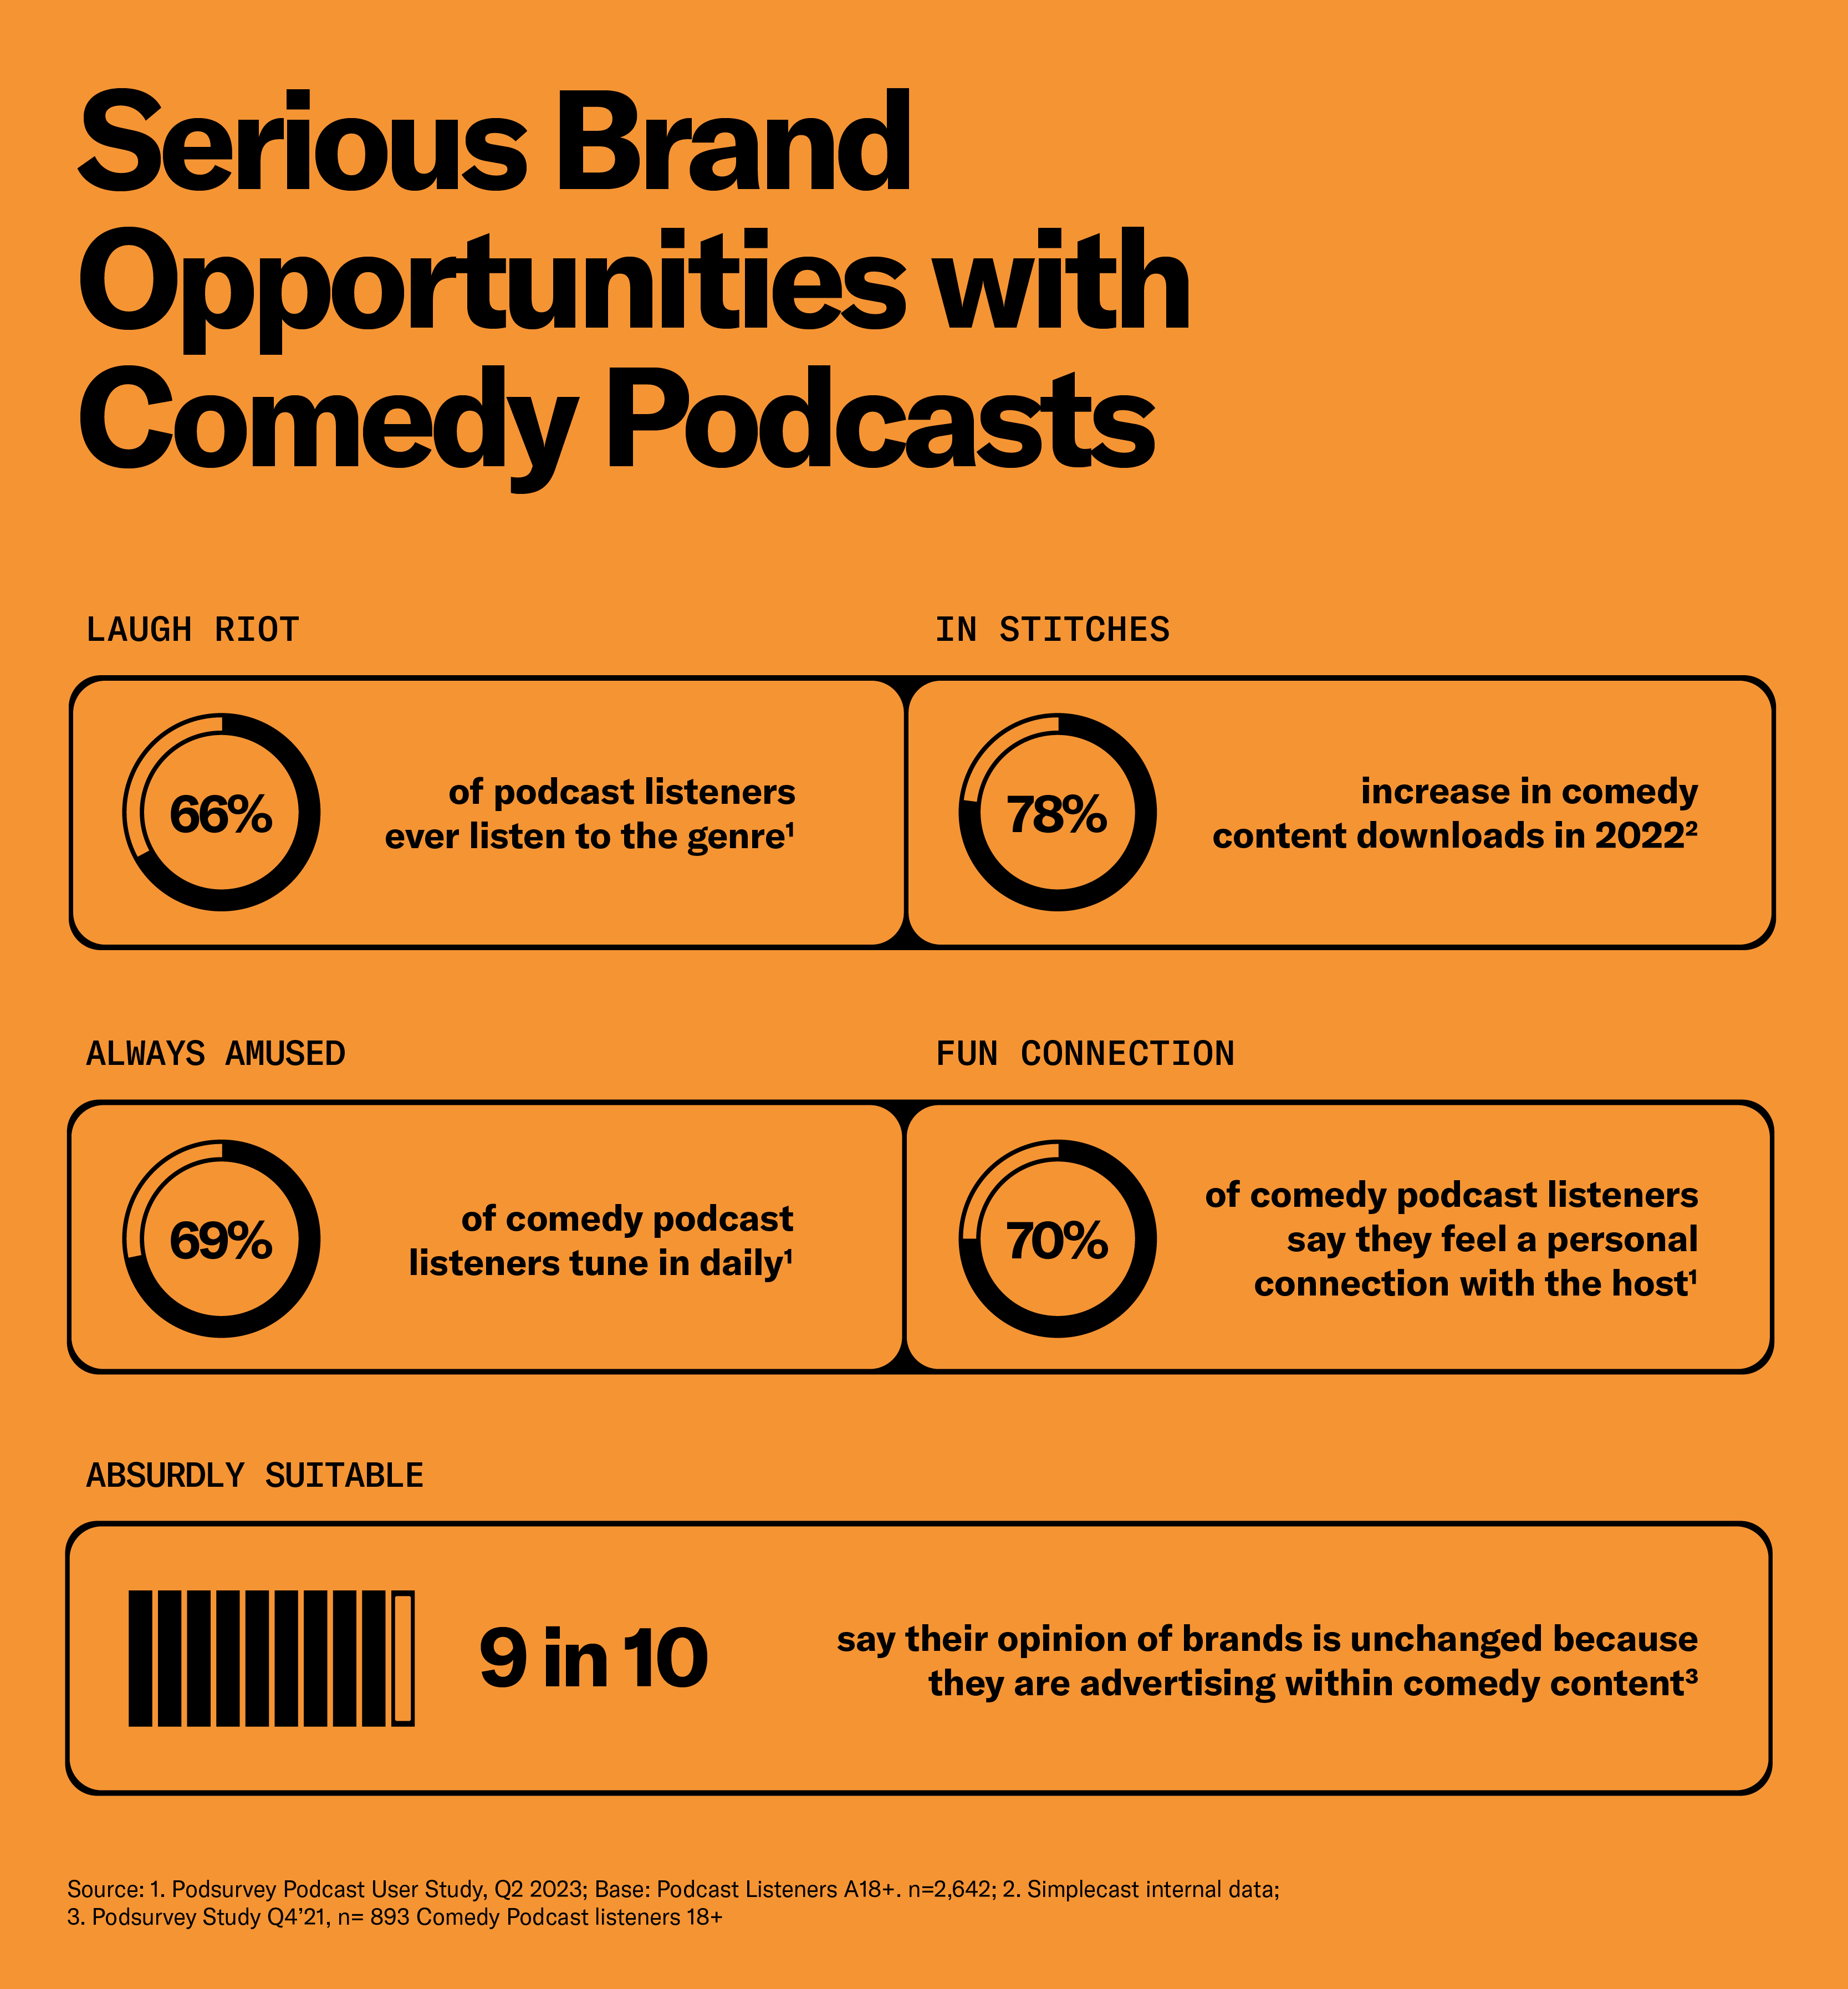 Comedy podcasts are brand safe